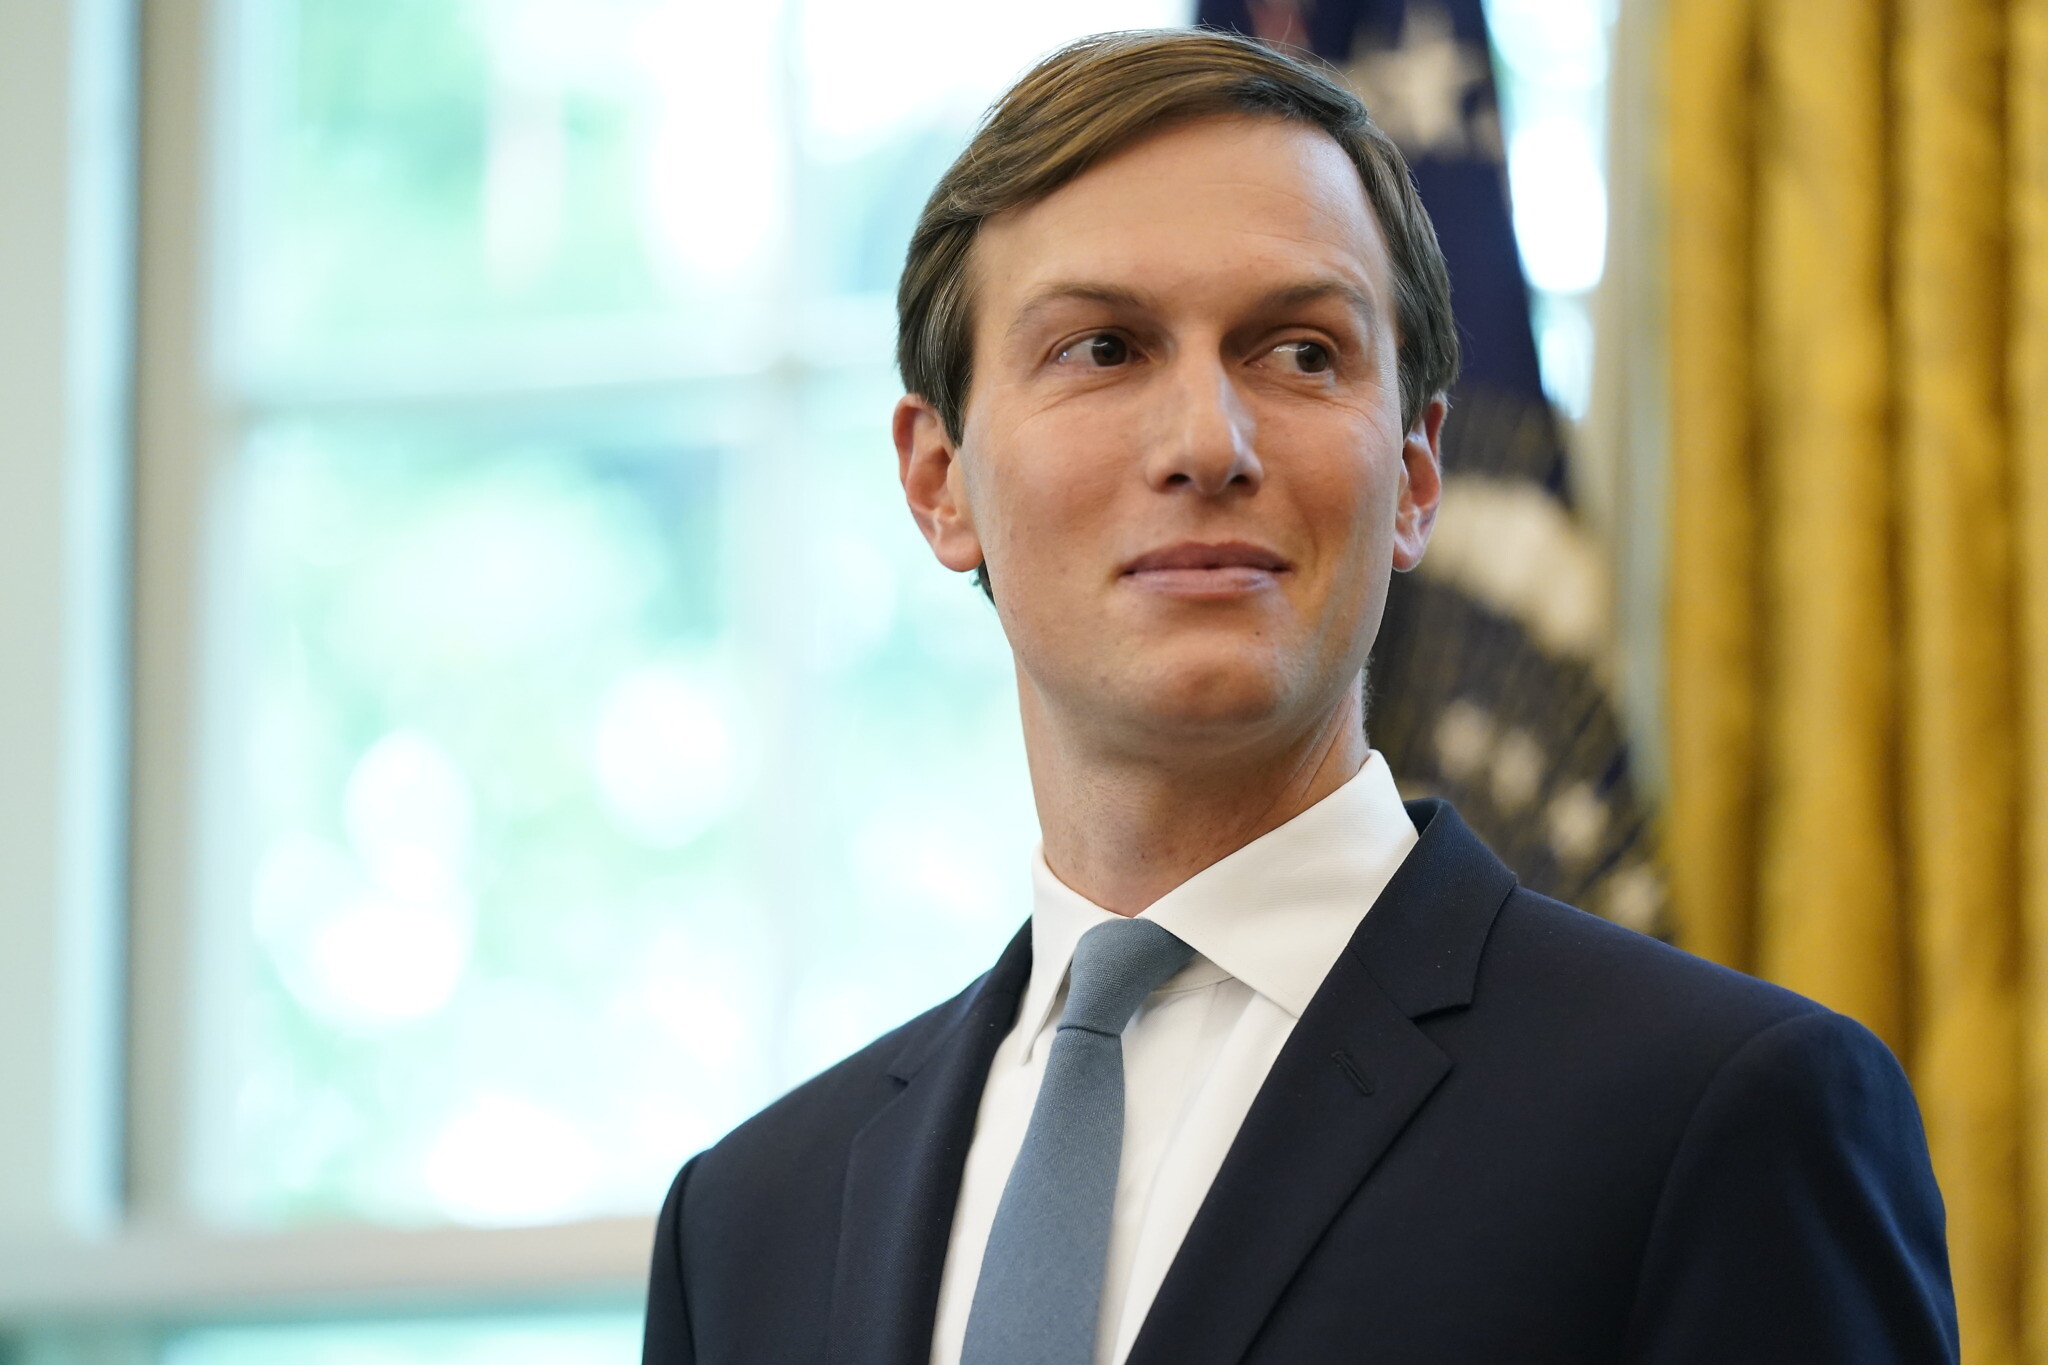 Donald Trump's Son-In-Law Quietly Battle Cancer While In The White House: Report